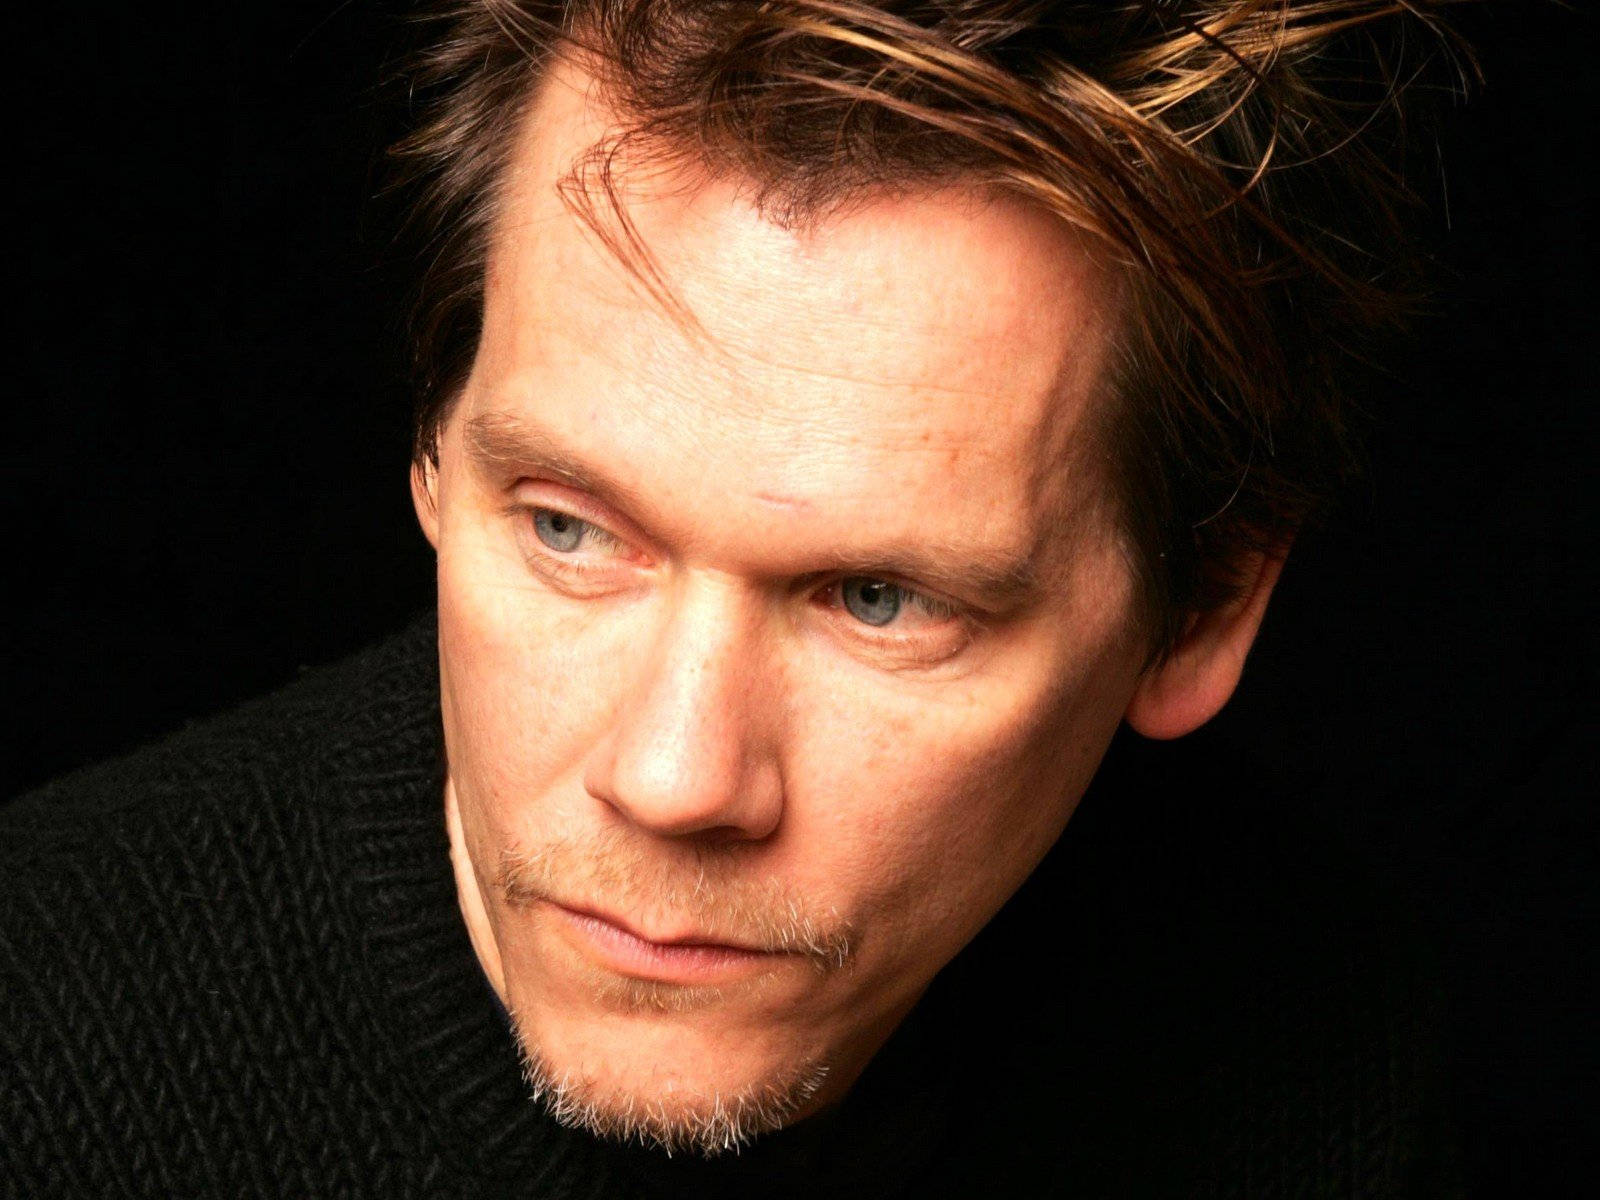 Hollywood Veteran Kevin Bacon in a Classic Black Suit Wallpaper